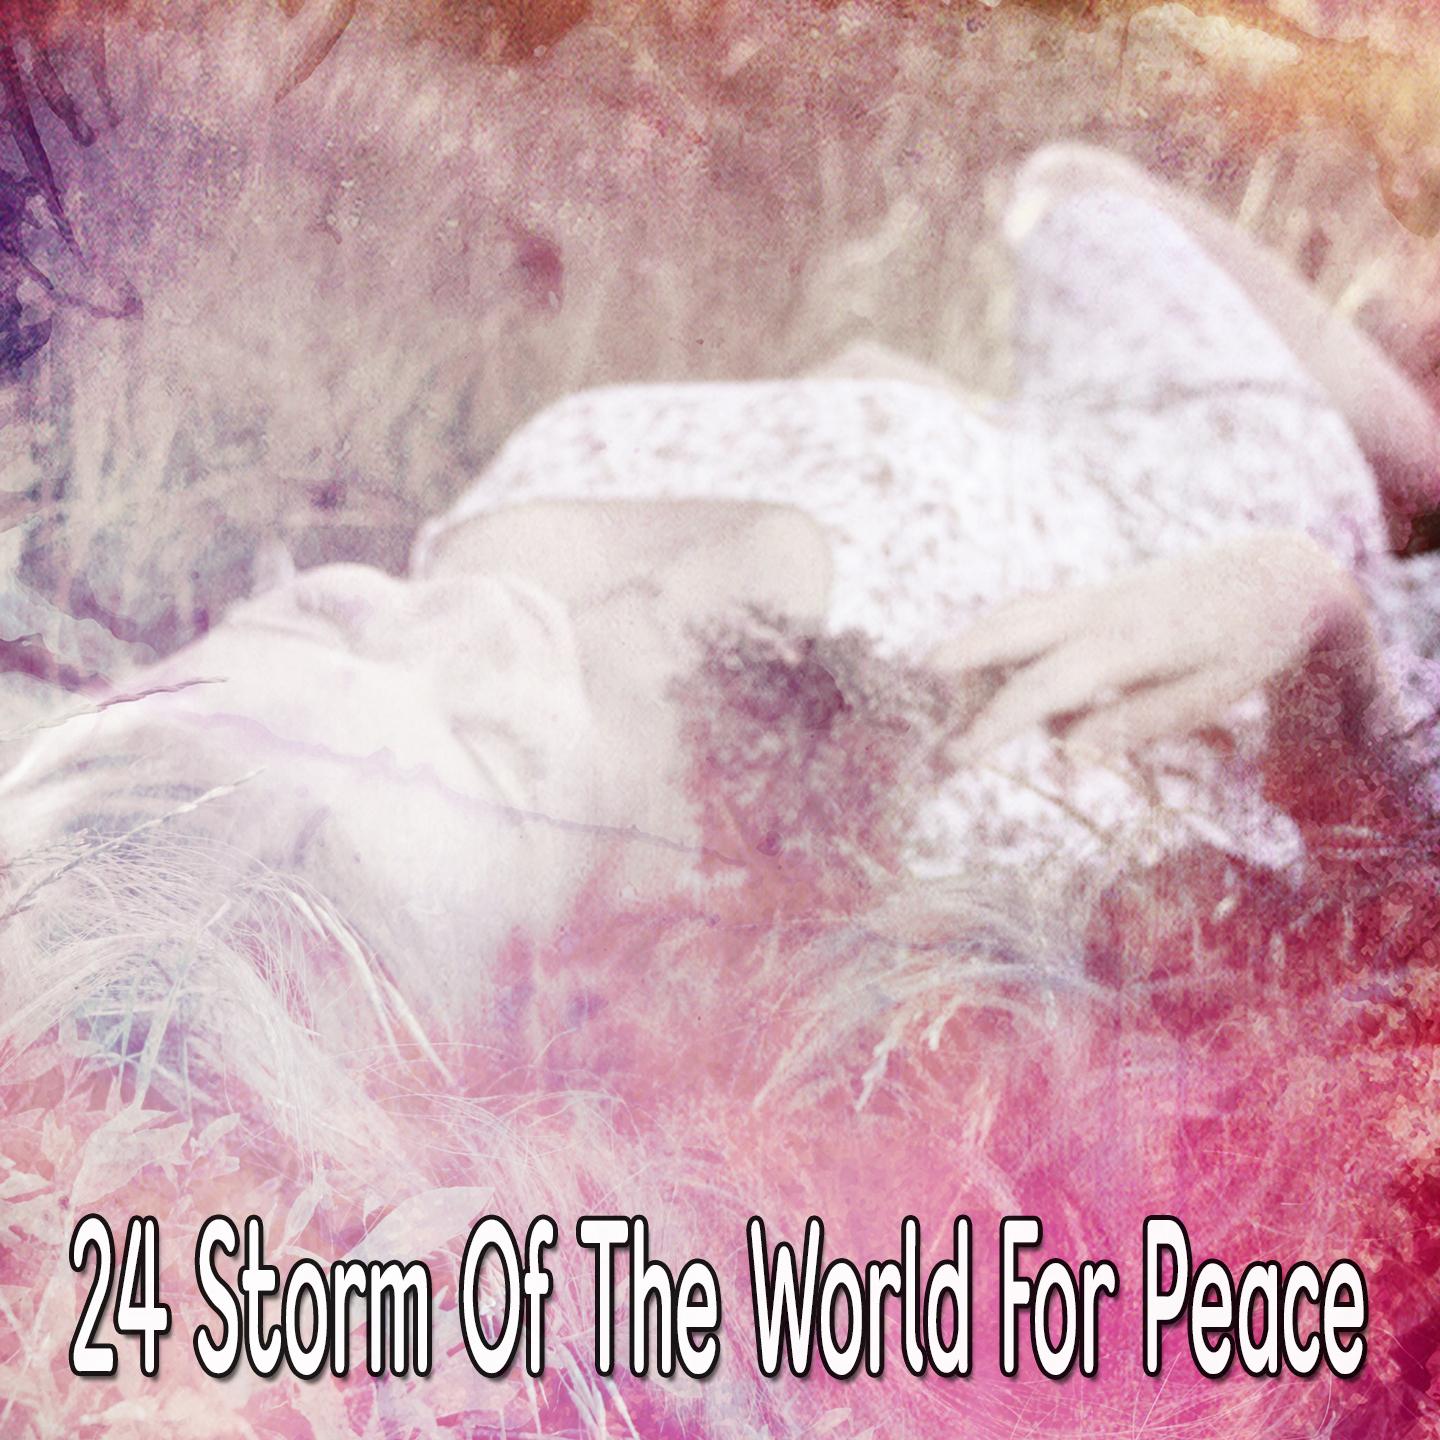 24 Storm of the World for Peace